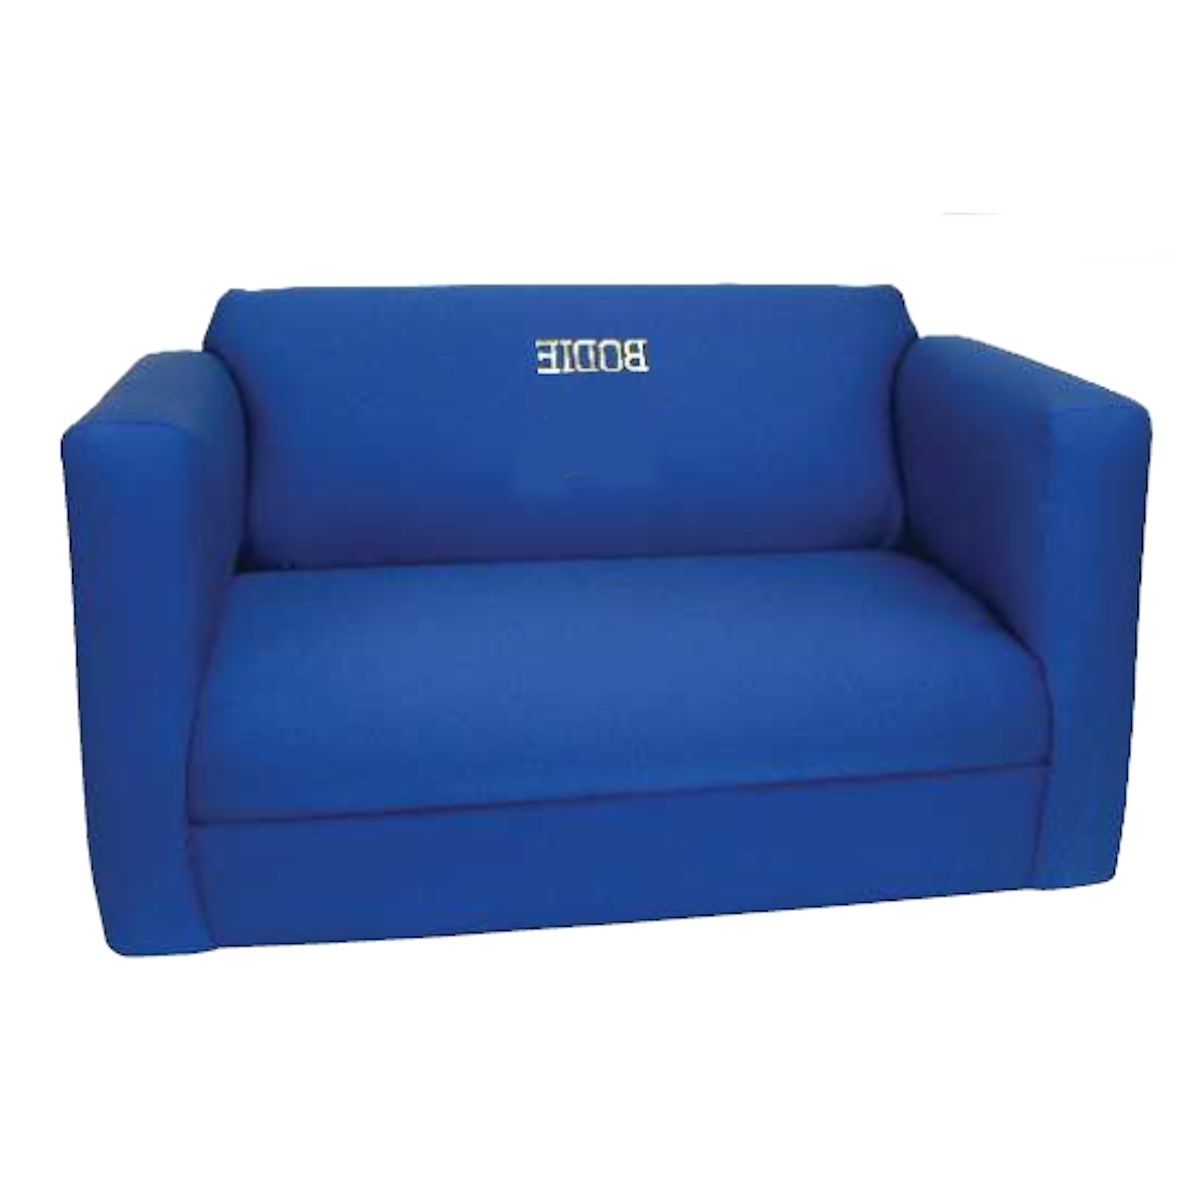 Sofa : Toddler Boy Sofa Kids Sleeper Sofa Cheap Kids Sofa Beds Intended For 2017 Childrens Sofas (View 14 of 15)